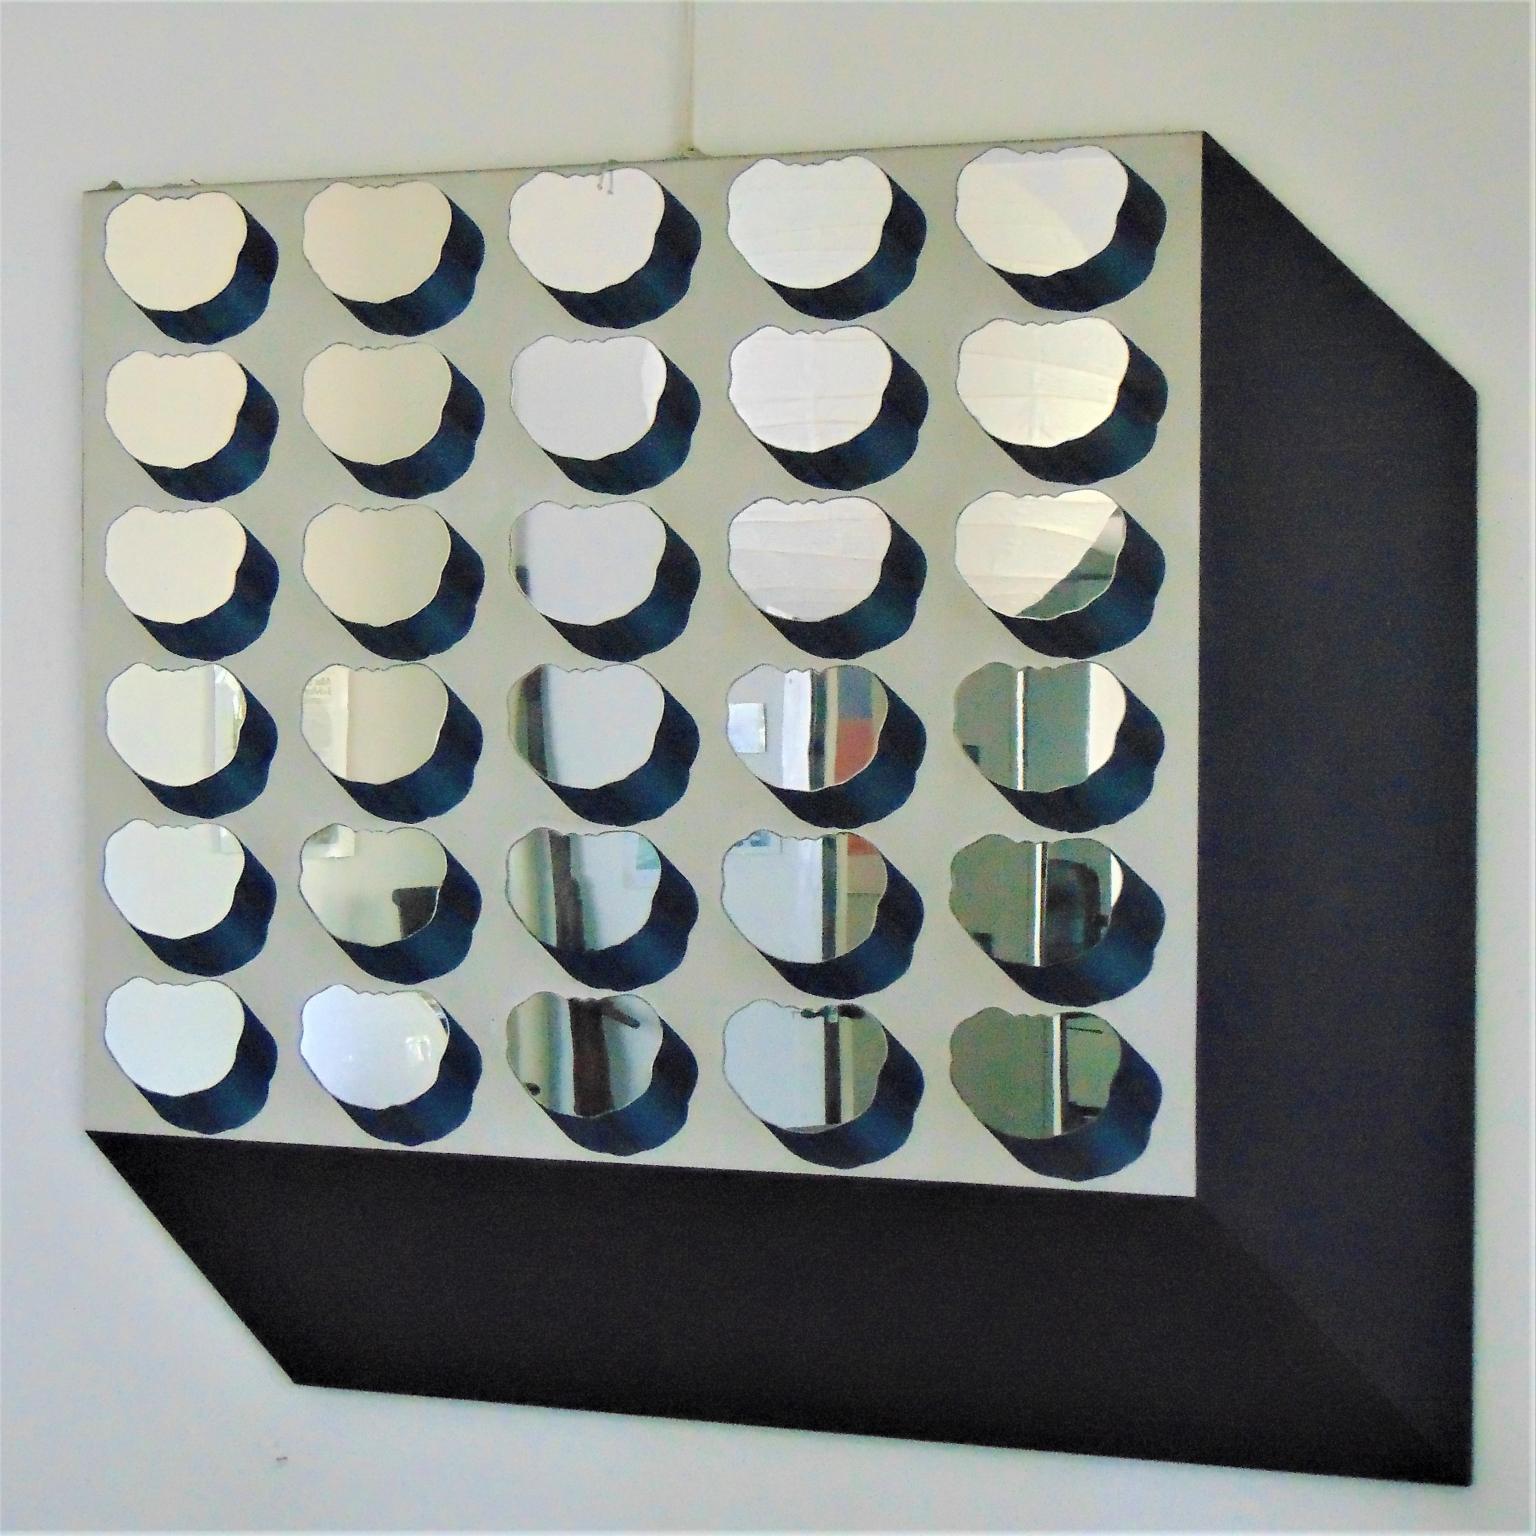 1968 Mirrored Pop Art Wall Sculpture, Concetto Pozzati, Acrylic on Canvas, Italy In Good Condition For Sale In Arosio, IT